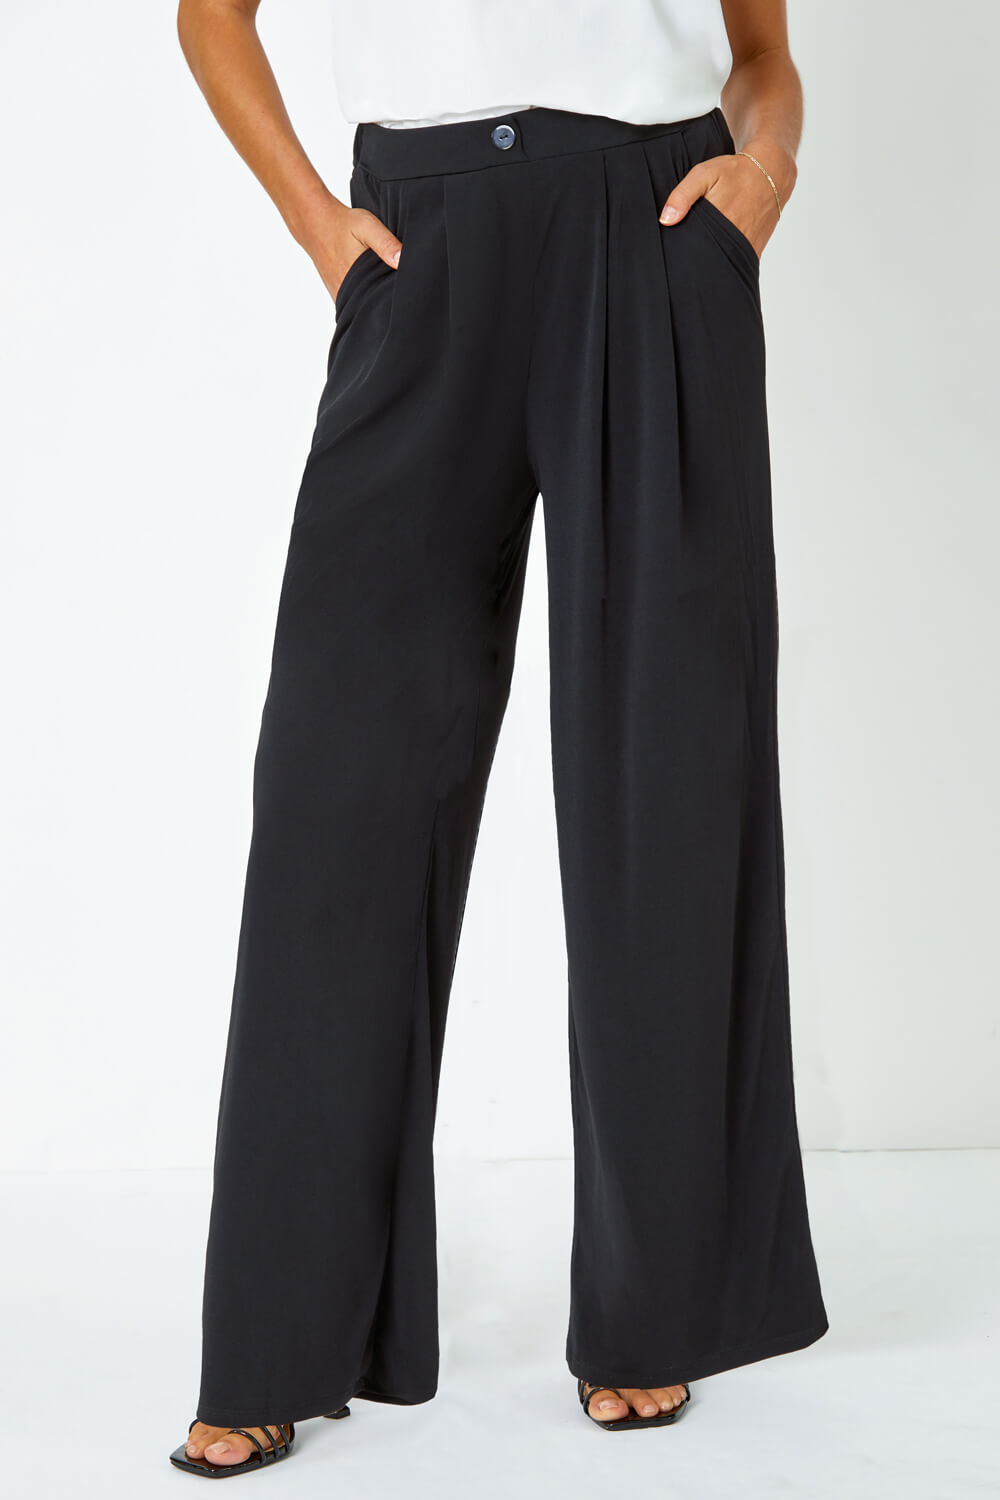 Black Button Detail Wide Leg Stretch Trousers, Image 4 of 5